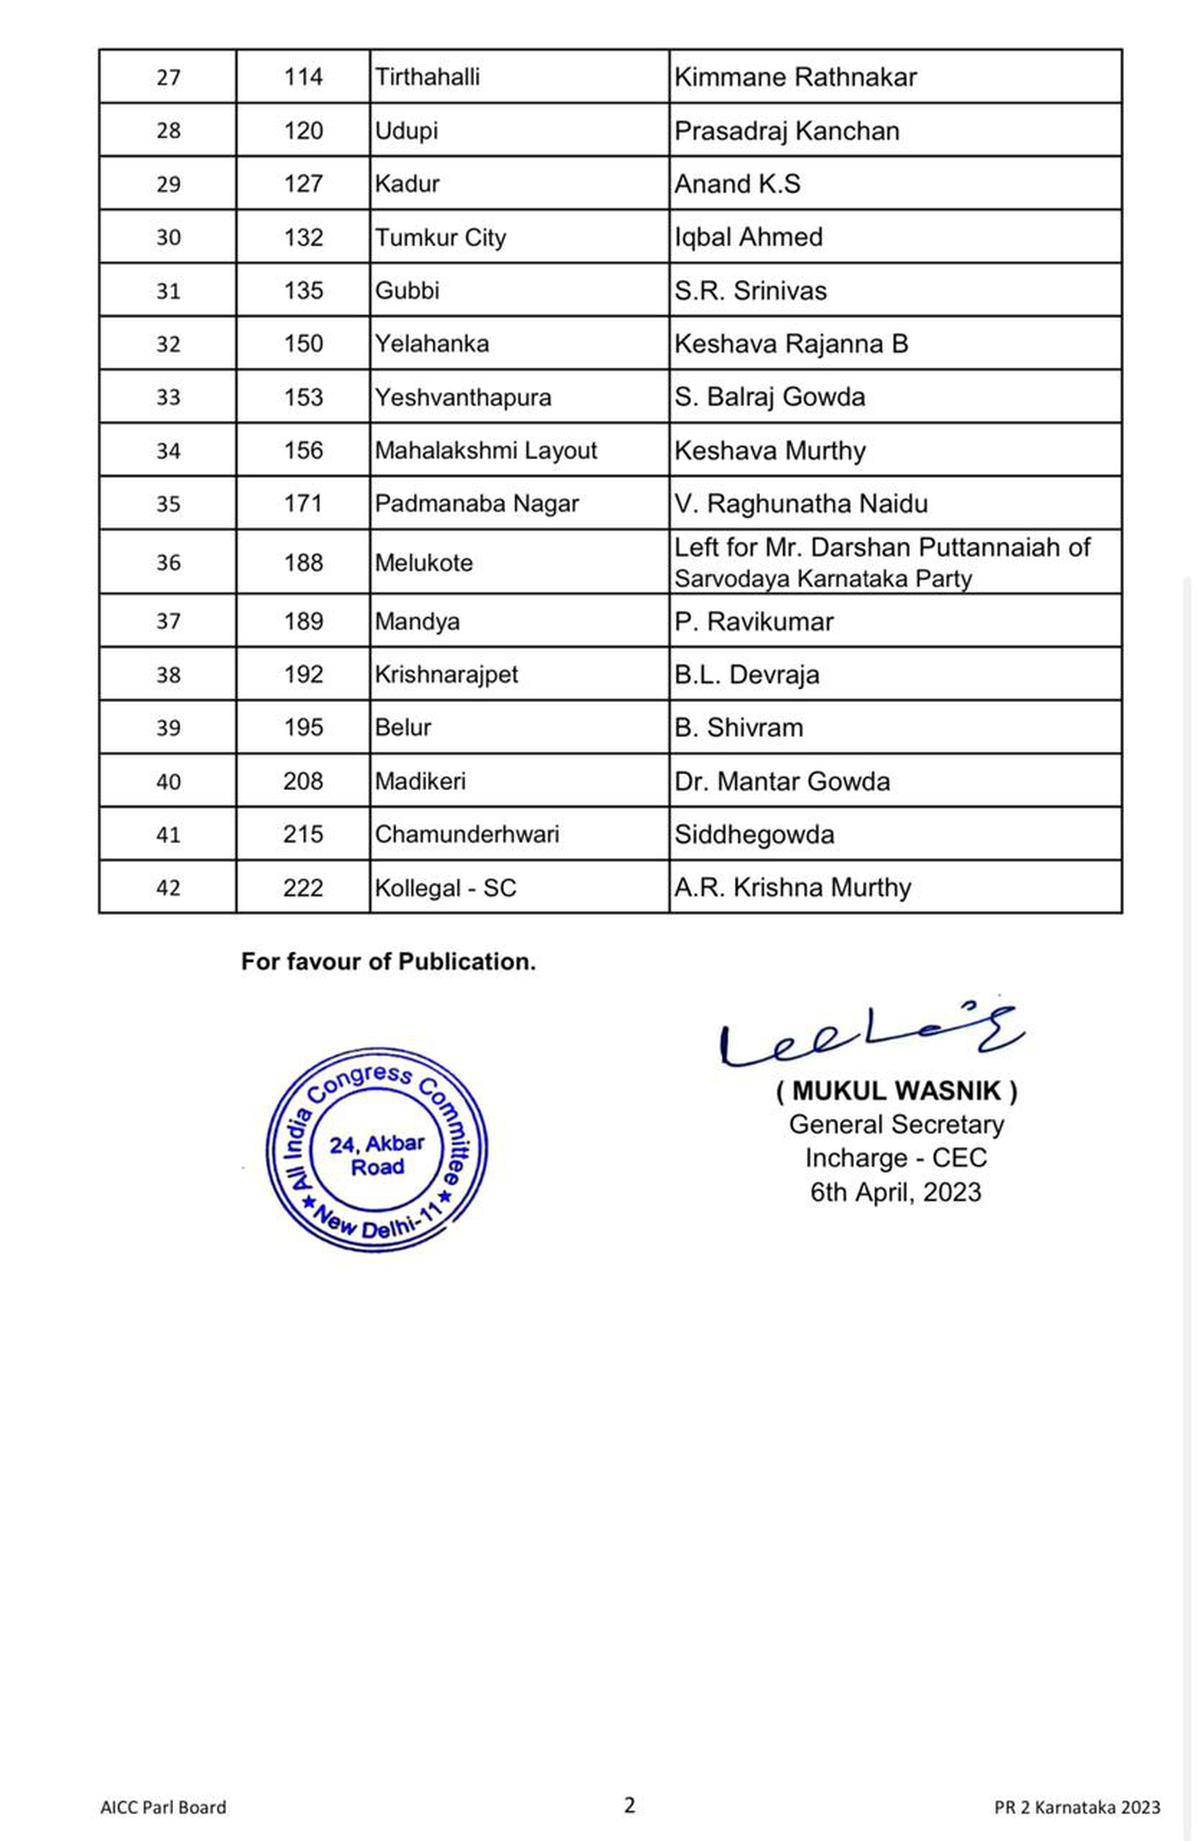 Congress announces second list of 42 candidates for Karnataka Assembly